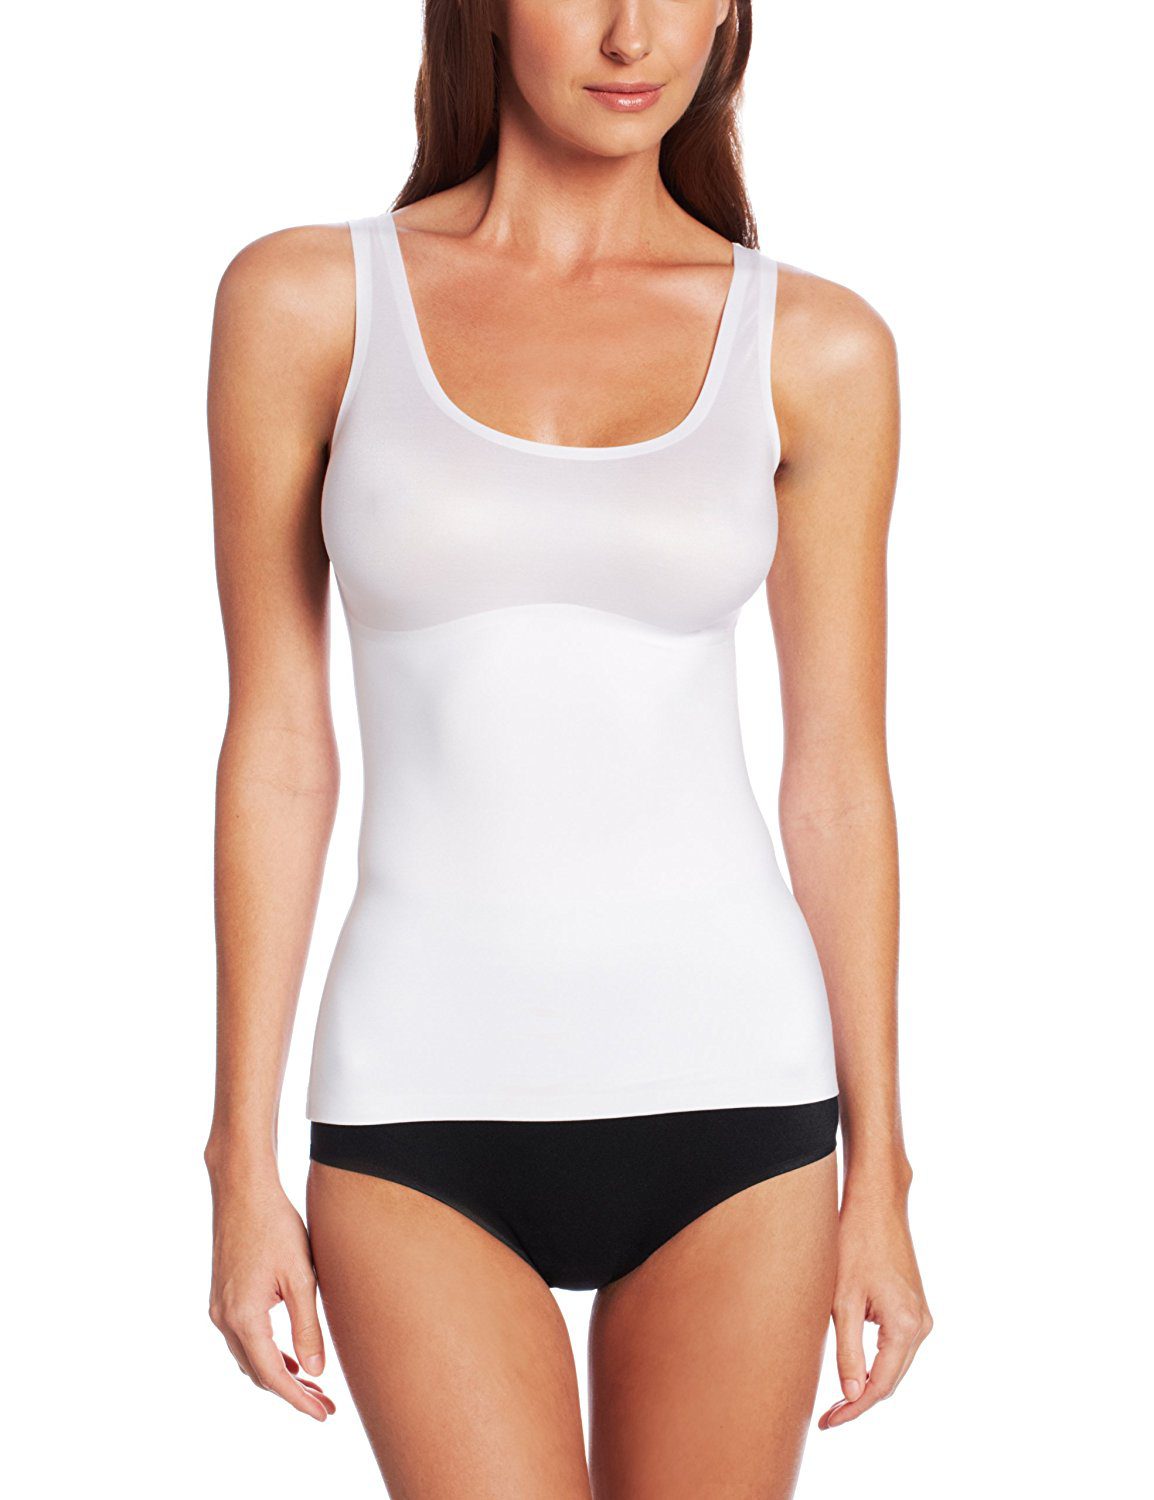 Flexees By Maidenform Camisole - Apparel Direct Distributor